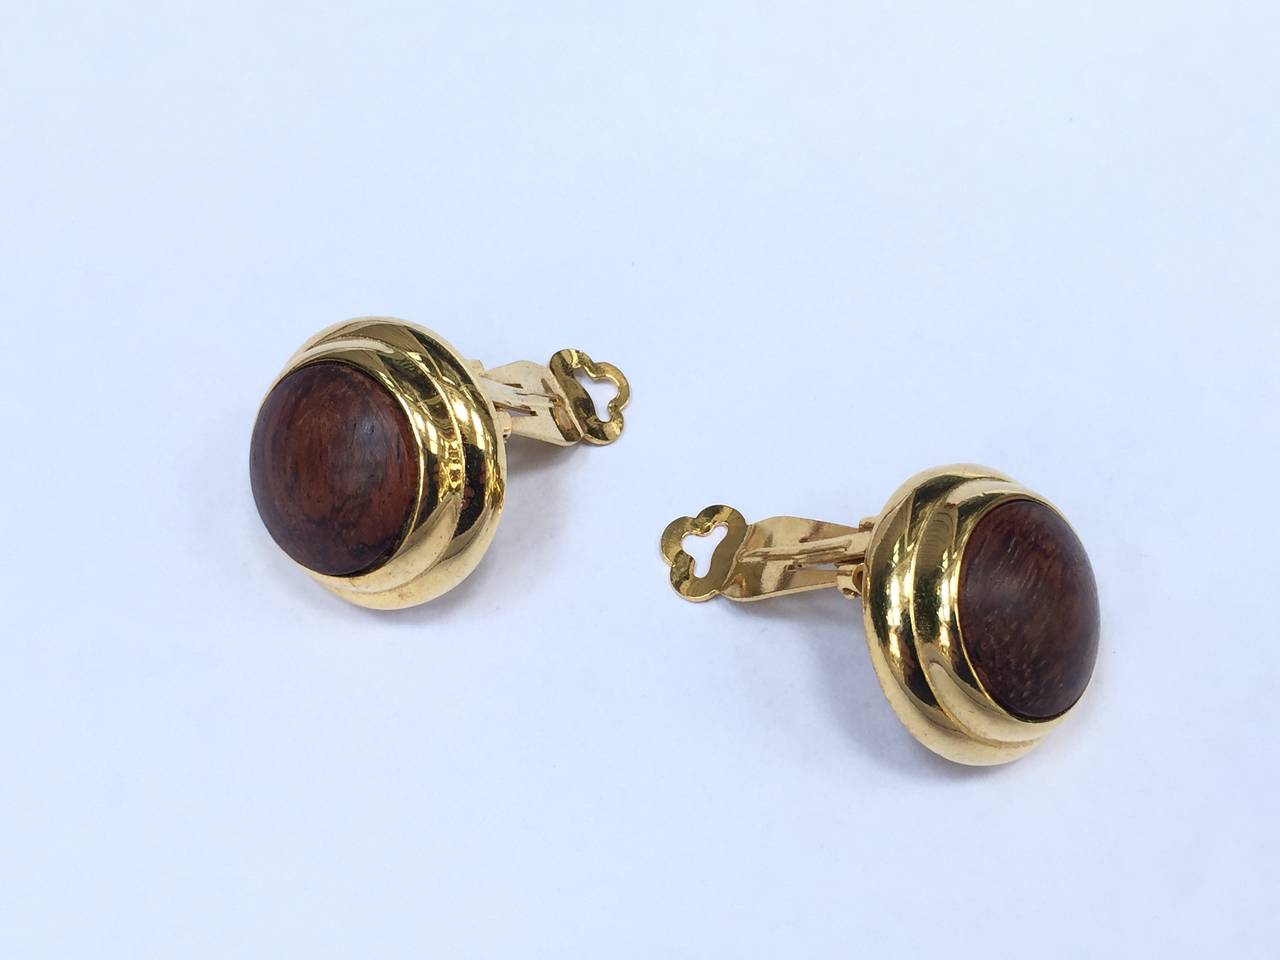 Alexis Kirk 1980s 'Wood Collection' modern clip earrings. These Alexis Kirk clip earrings were given to my client by Ed Riley who worked for Alexis Kirk. Ed Riley worked for Alexis Kirk and then he went to work for Halston. Ed Riley was a close